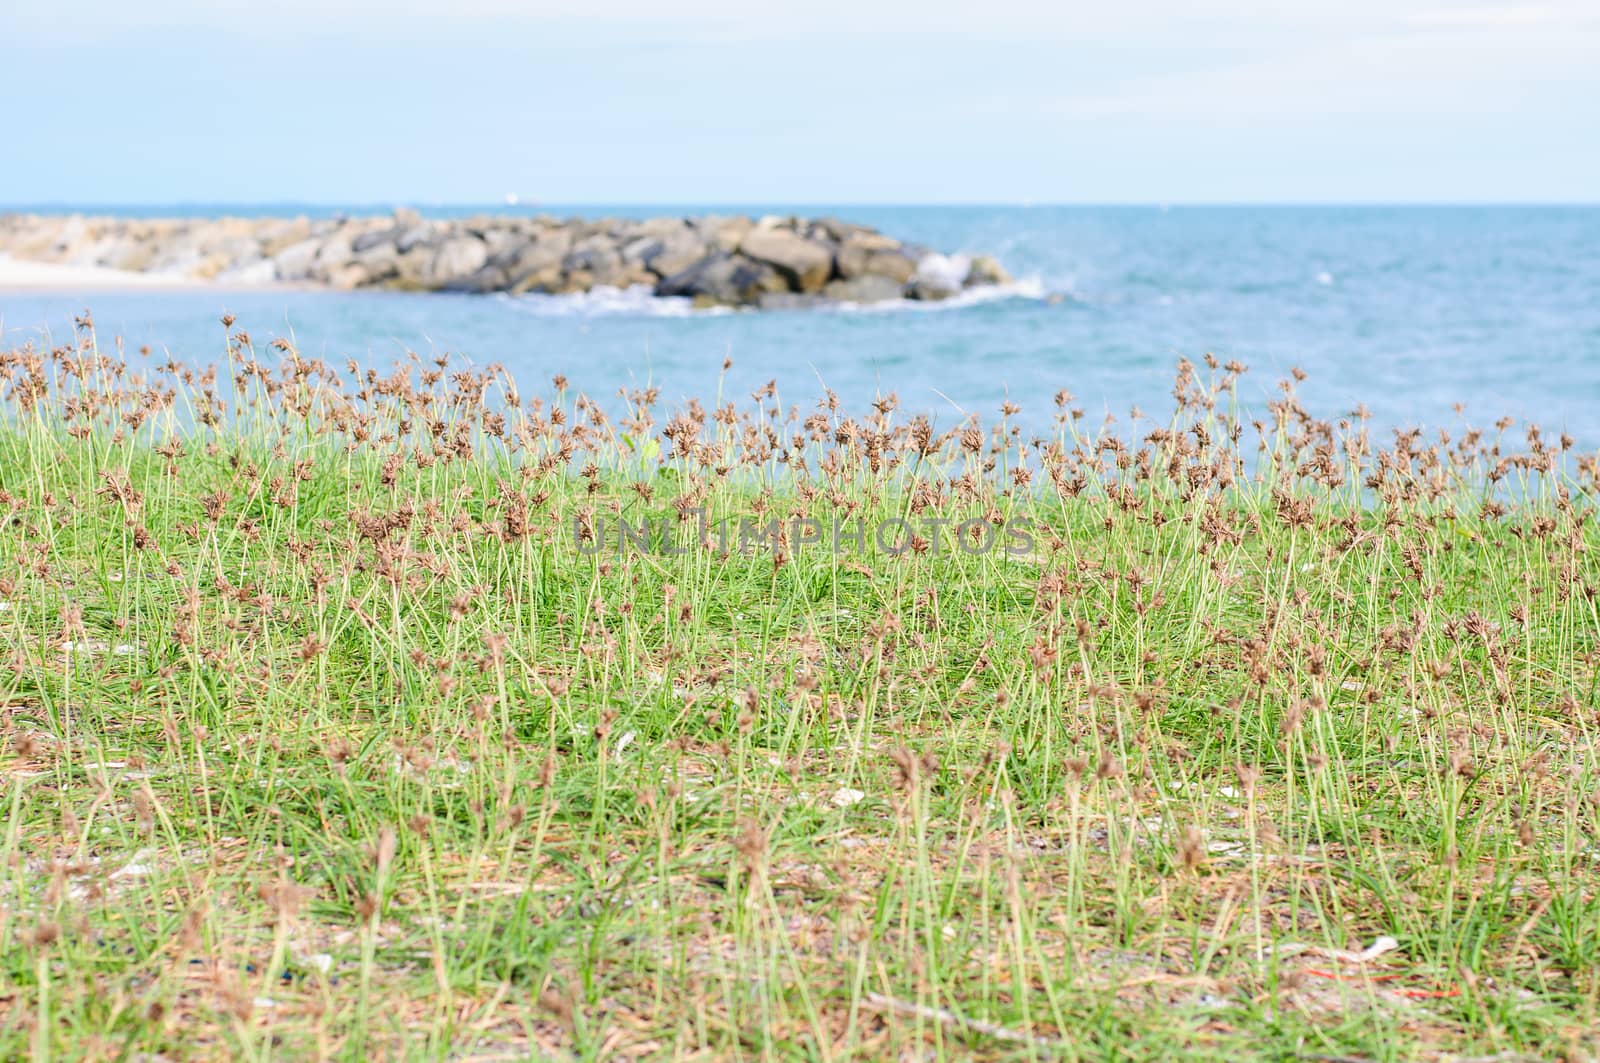 A grass beside the sea in Thailand.